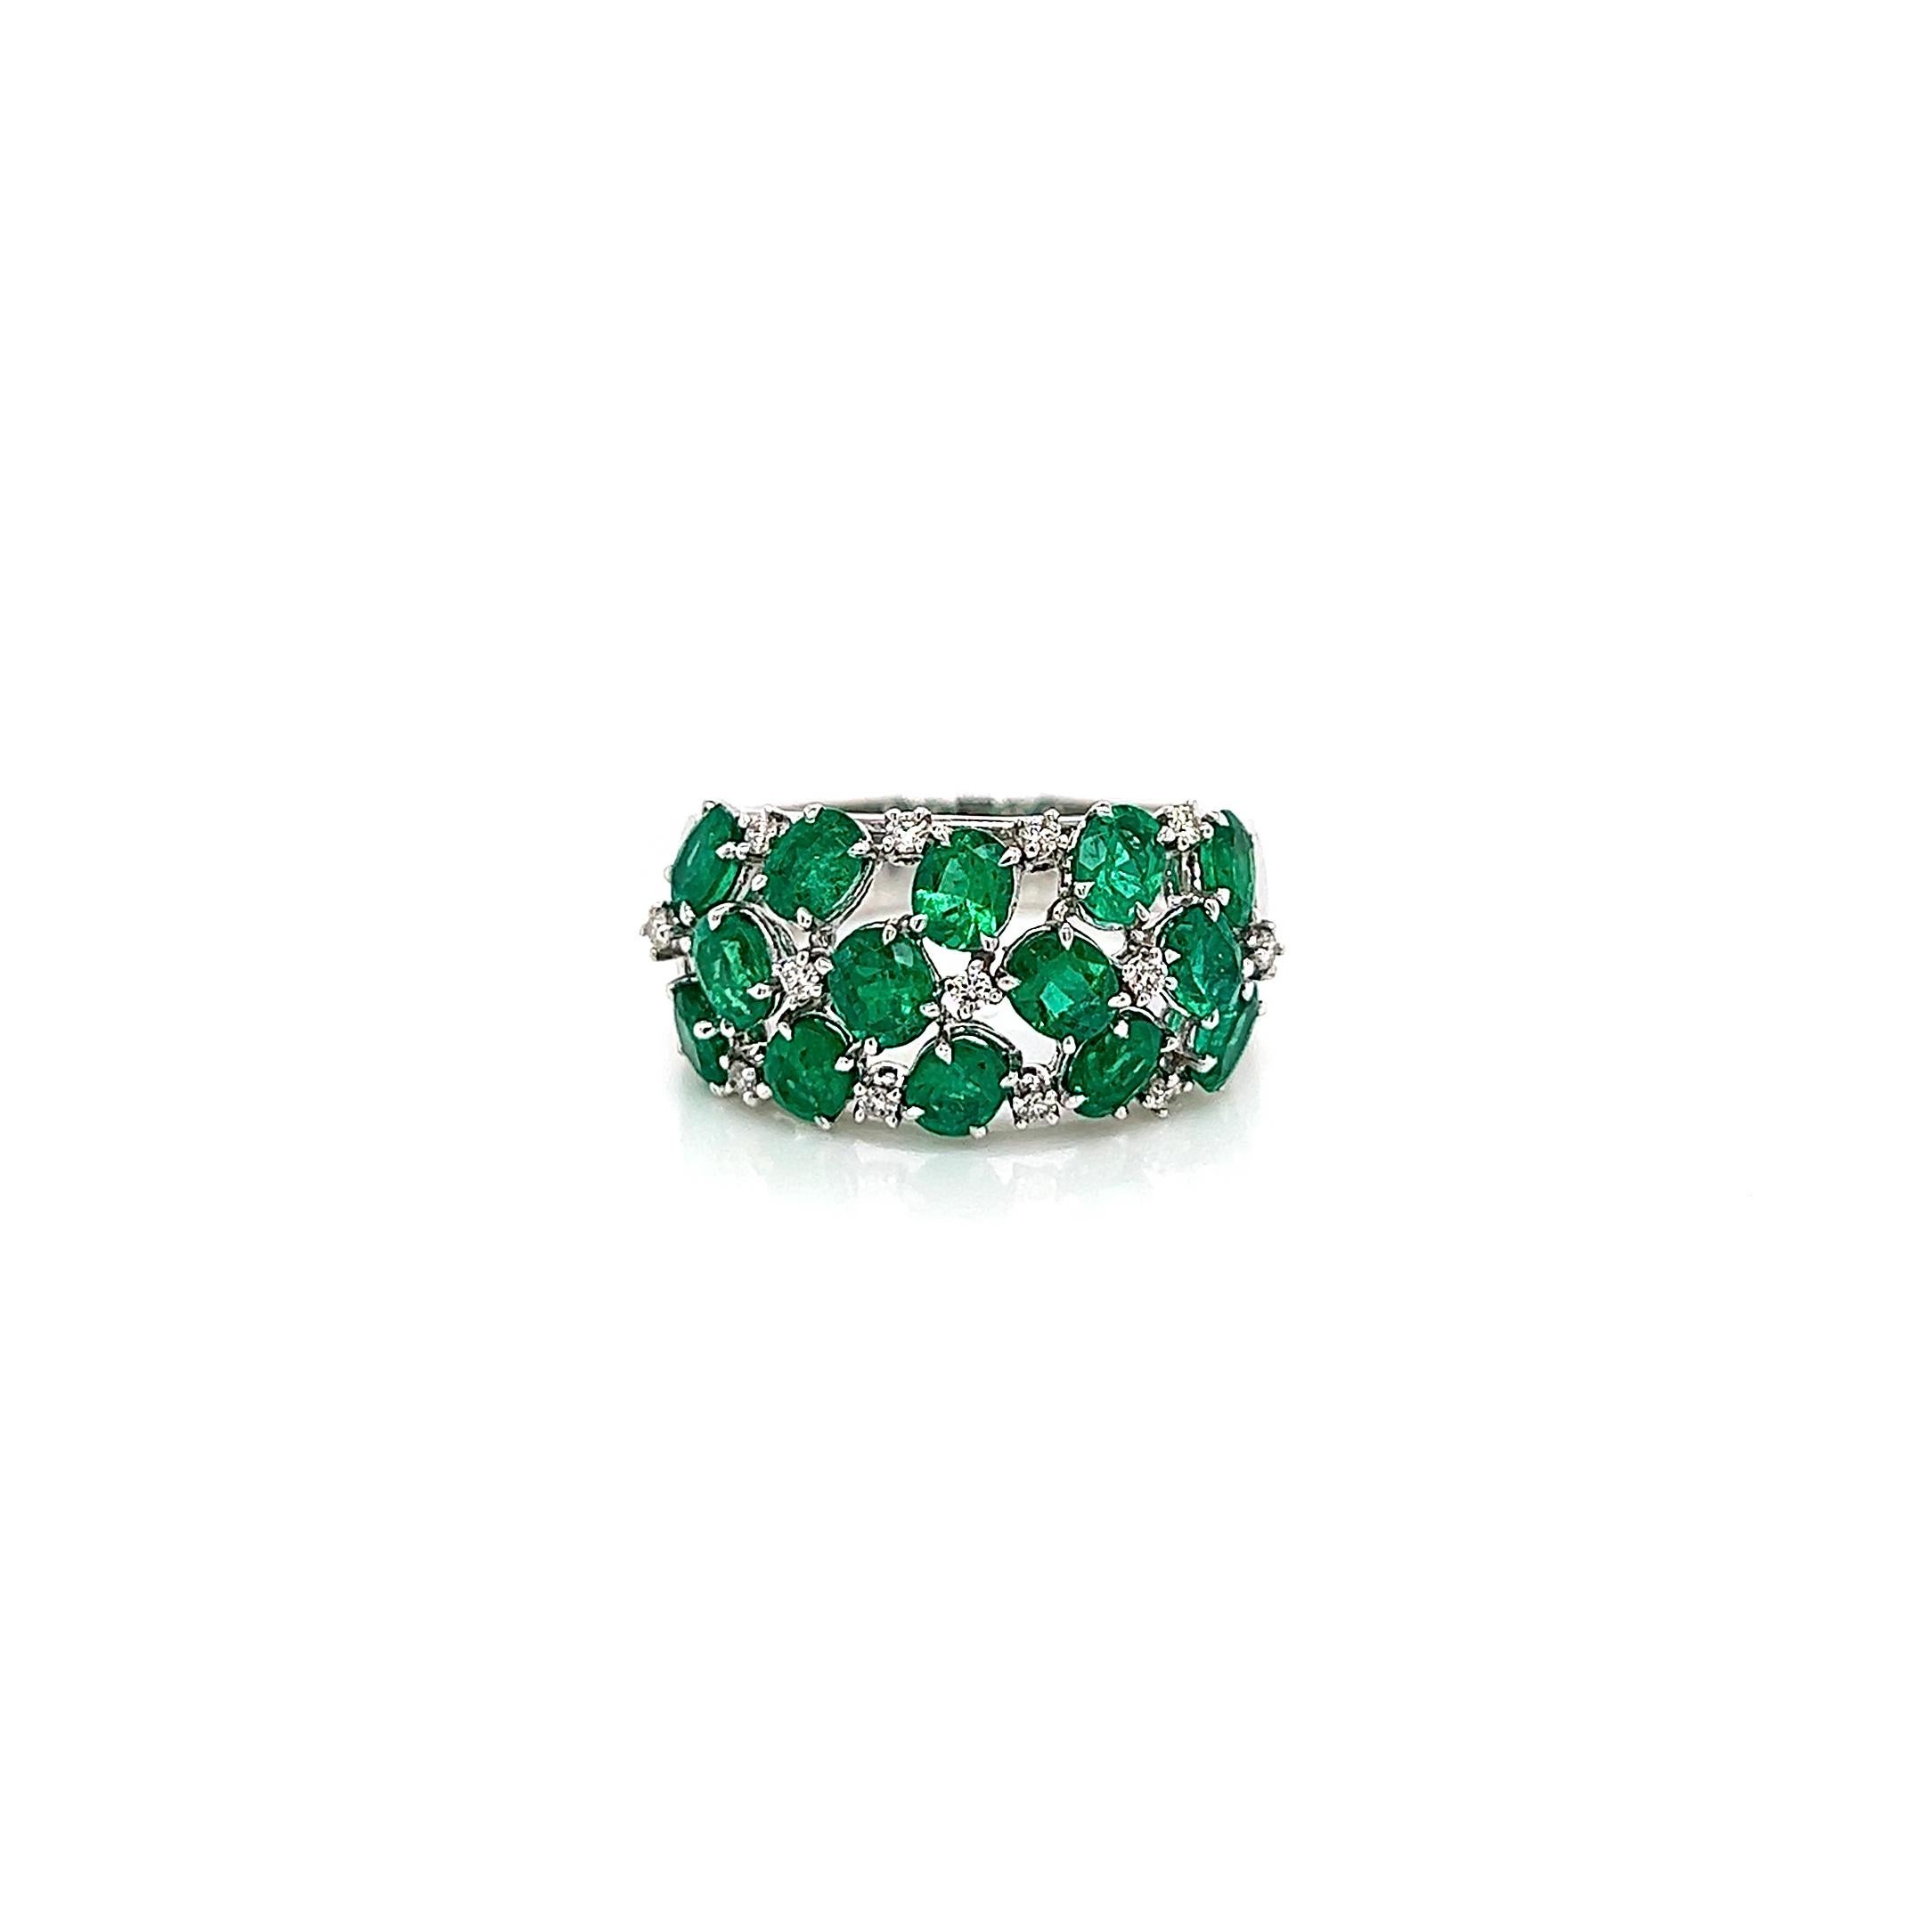 2.74 Total Carat Green Emerald and Diamond Ladies Ring

-Metal Type: 18K White Gold
-2.59 Carat Oval Columbian Green Emeralds
-0.15 Carat Round Natural Diamonds, G-H Color, VS-SI Clarity
-Size 7.0

Made in New York City.